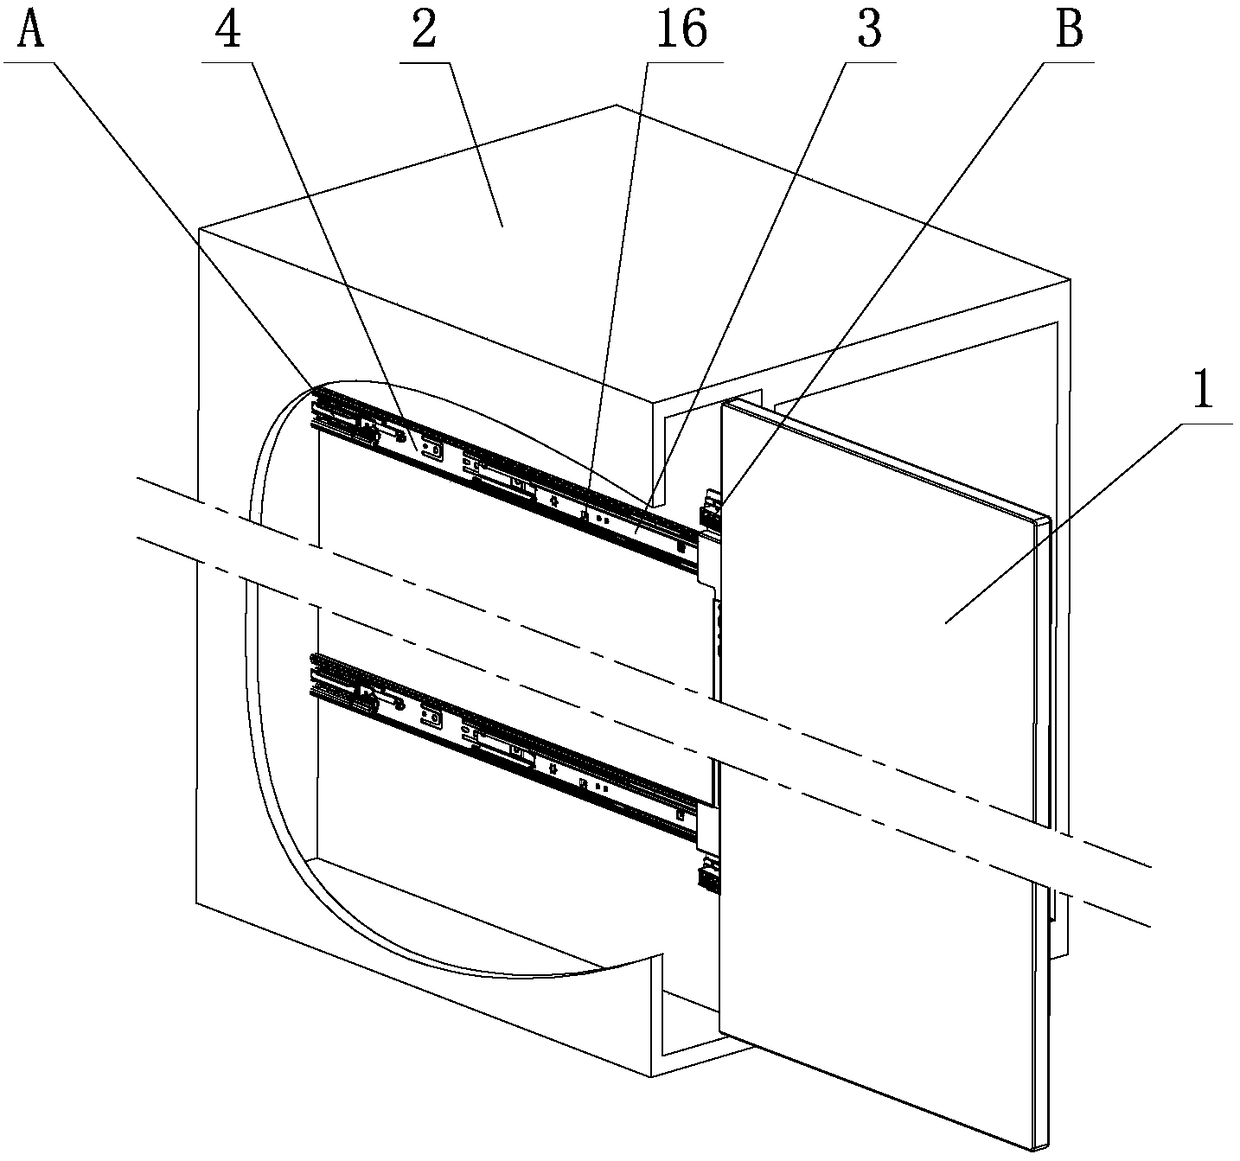 Rotation opening and closing locking structure for furniture